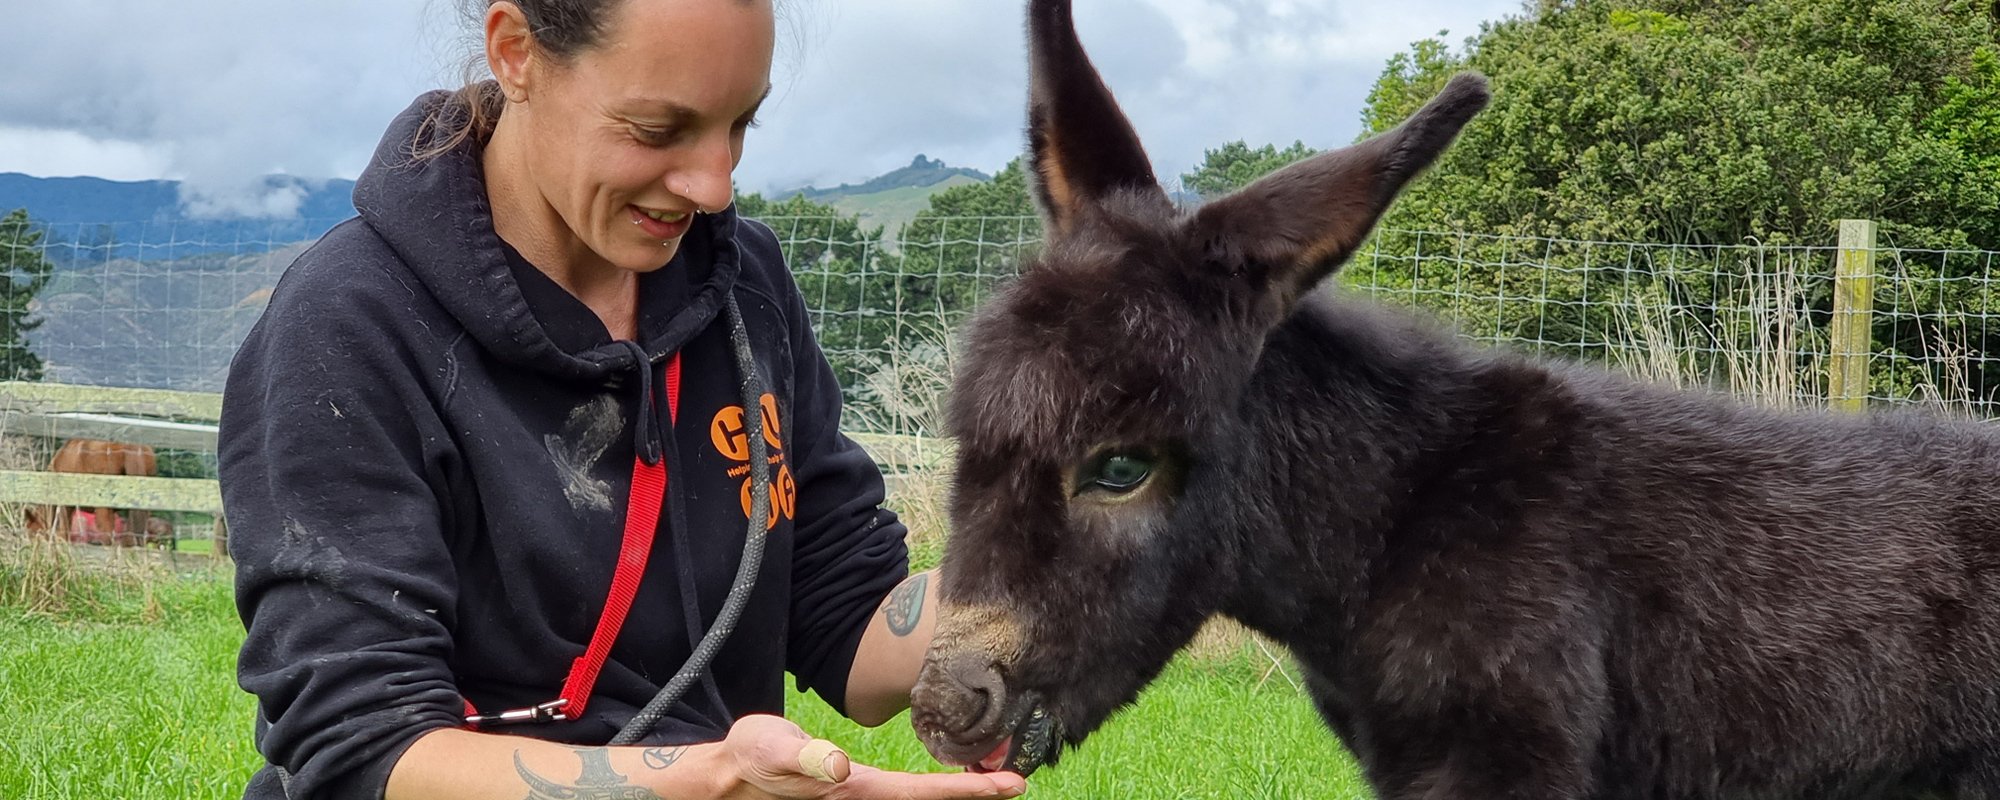 Huha team member in a navy blue hoodie feeding a dark brown donkey from her hand while sitting in a vibrant green paddock